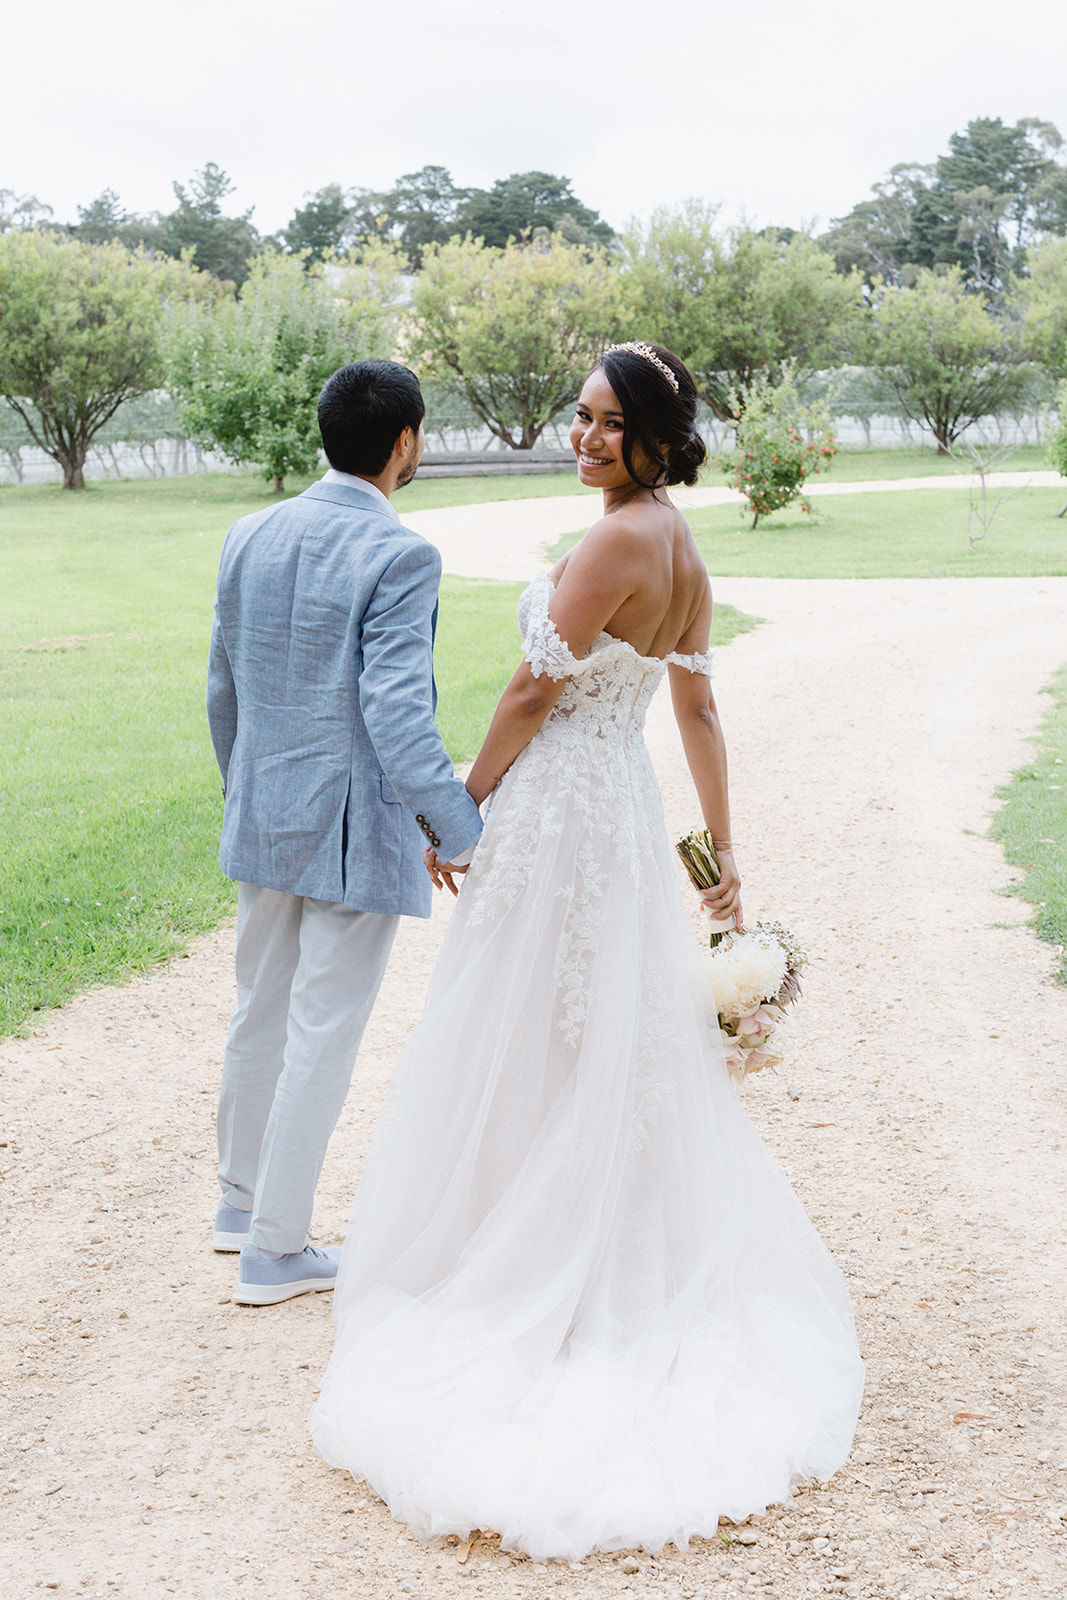 Romantic vintage wedding at Butterfly Red Hill for Evelin and Christian. Photos by Desfura Weddings.